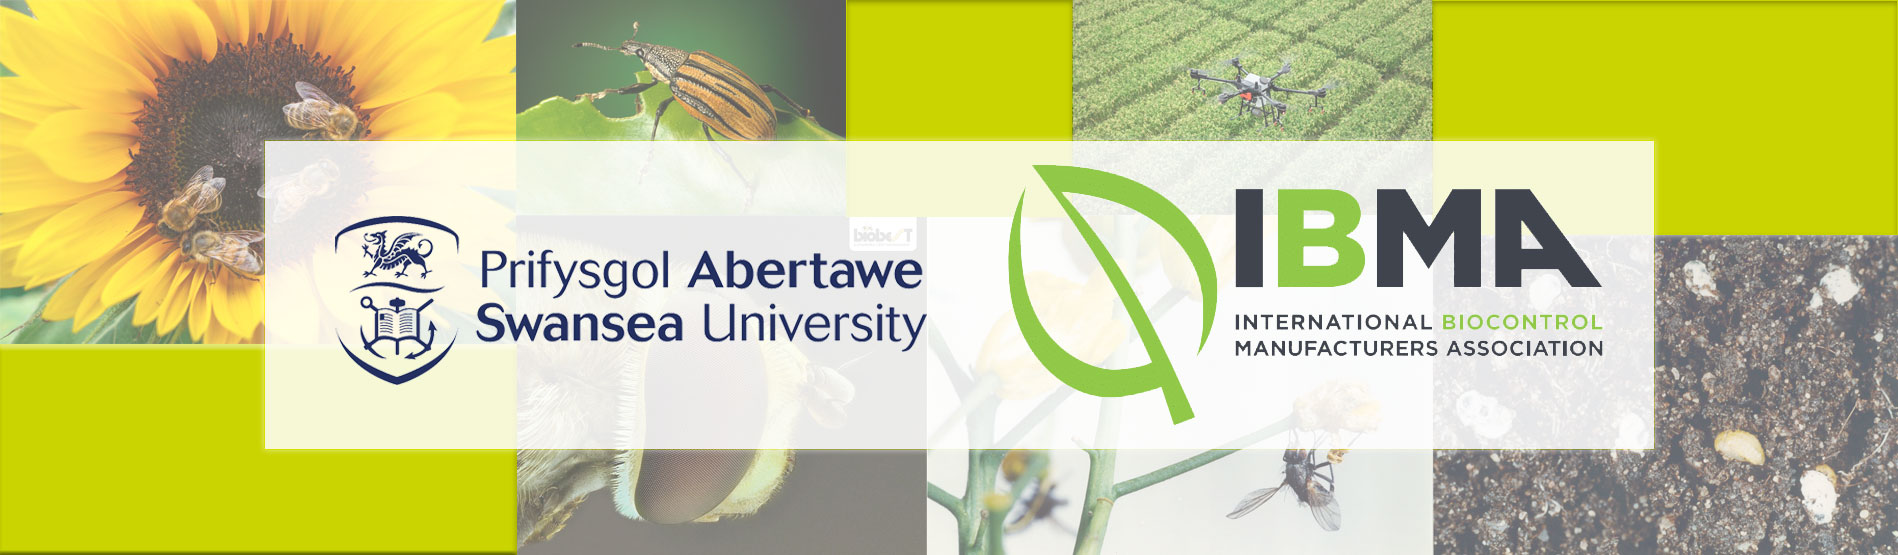 Images of insects, forestry and pesticide spraying. With the swansea University and ibm logo